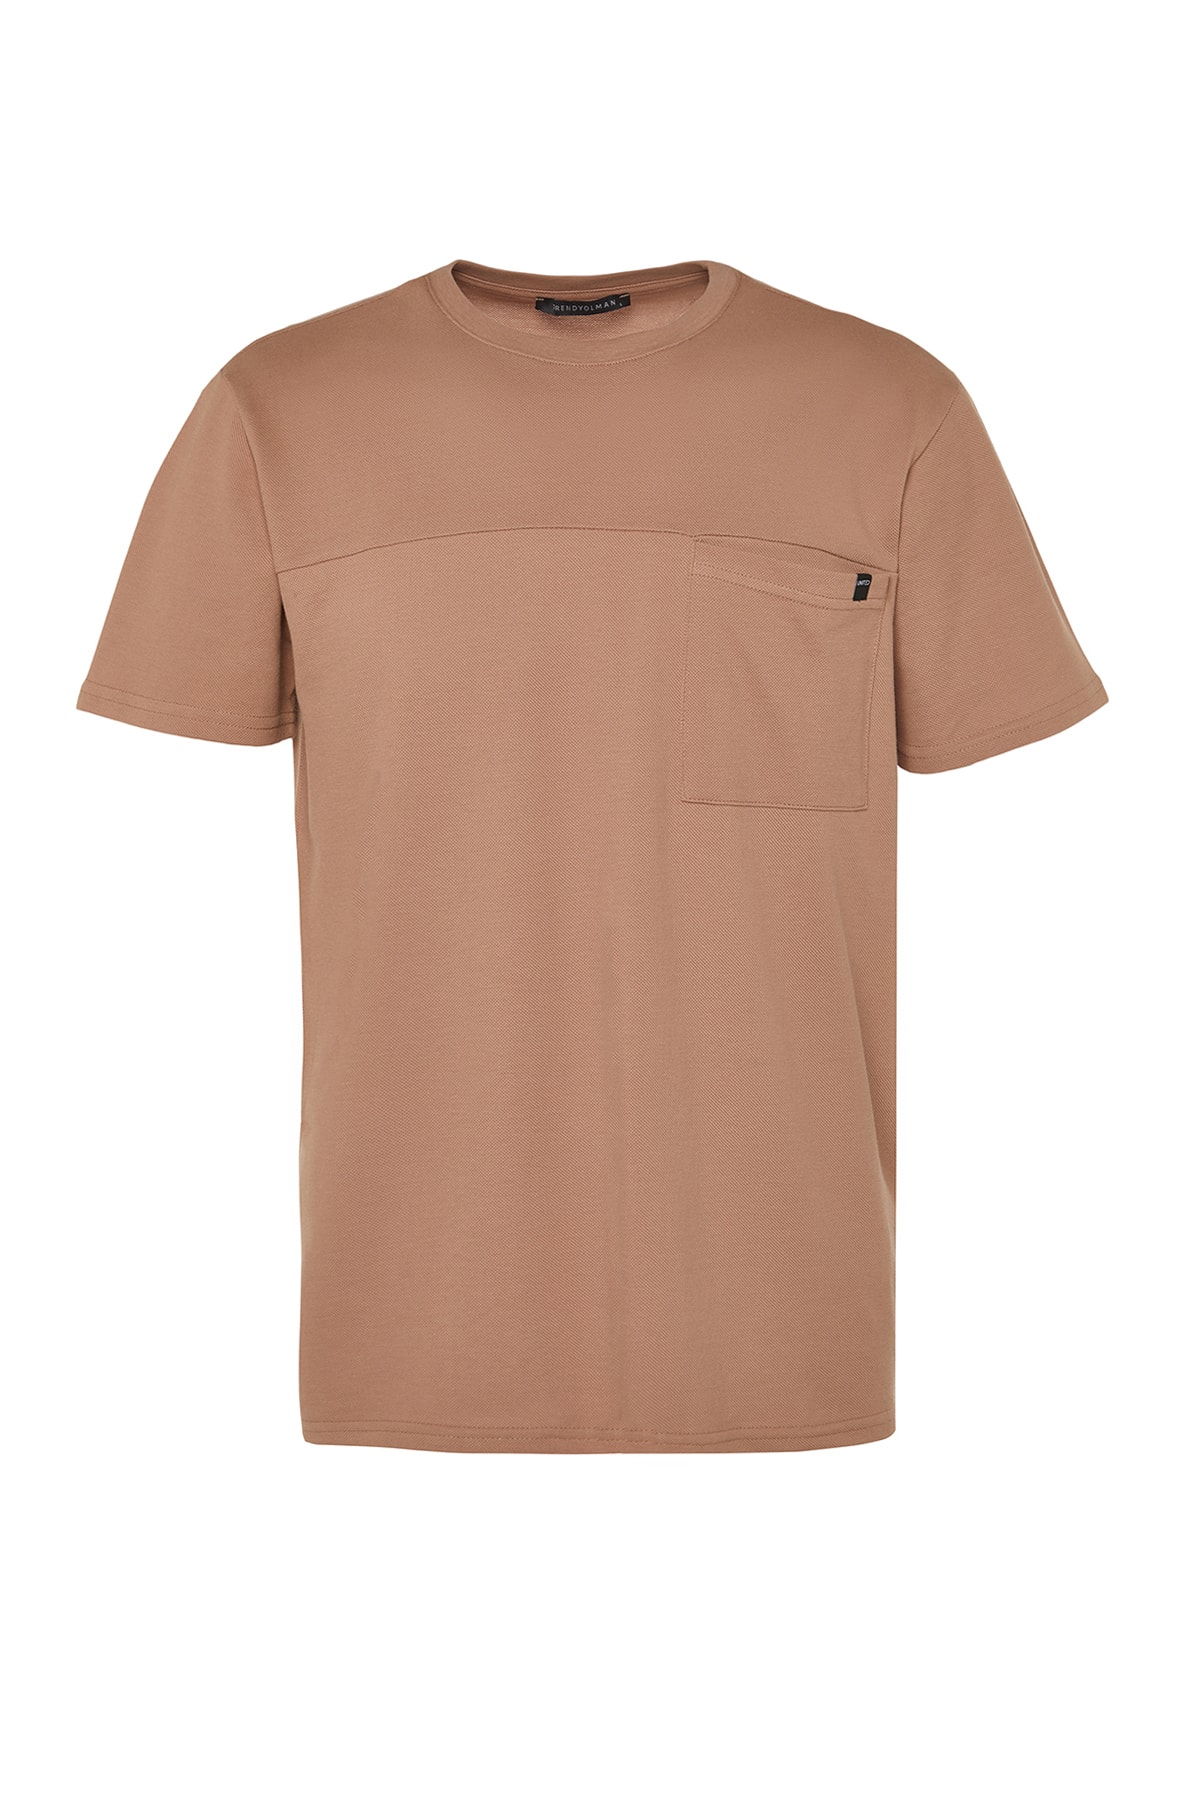 Trendyol Collection T-Shirt Braun Relaxed Fit